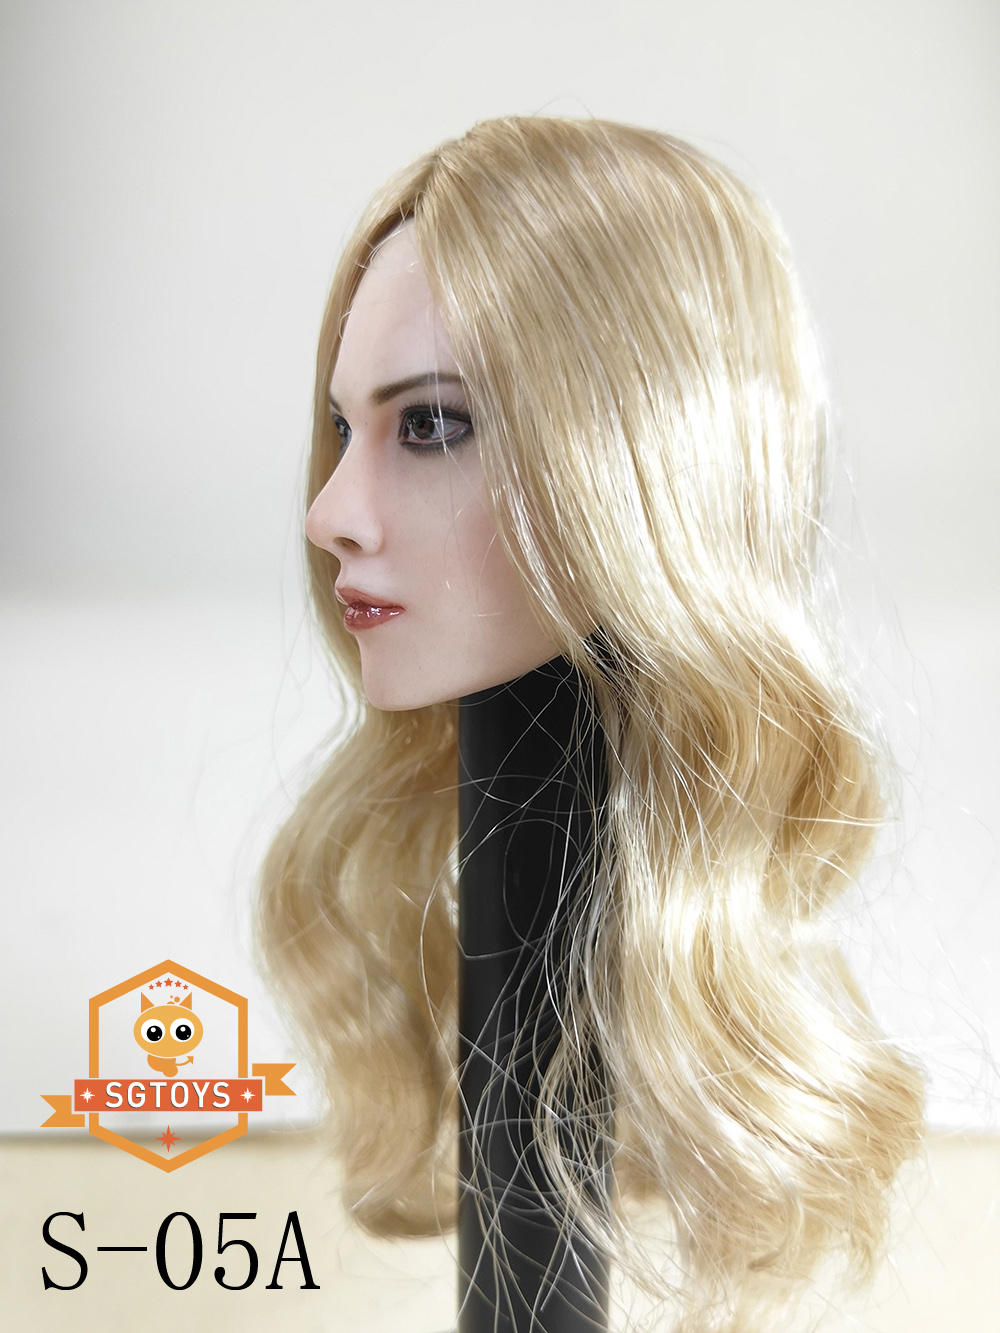 Headsculpt - NEW PRODUCT: SGTOYS New product: 1/6 Female head carving S-05# - Three hairstyles (for TBLeague body) 3148